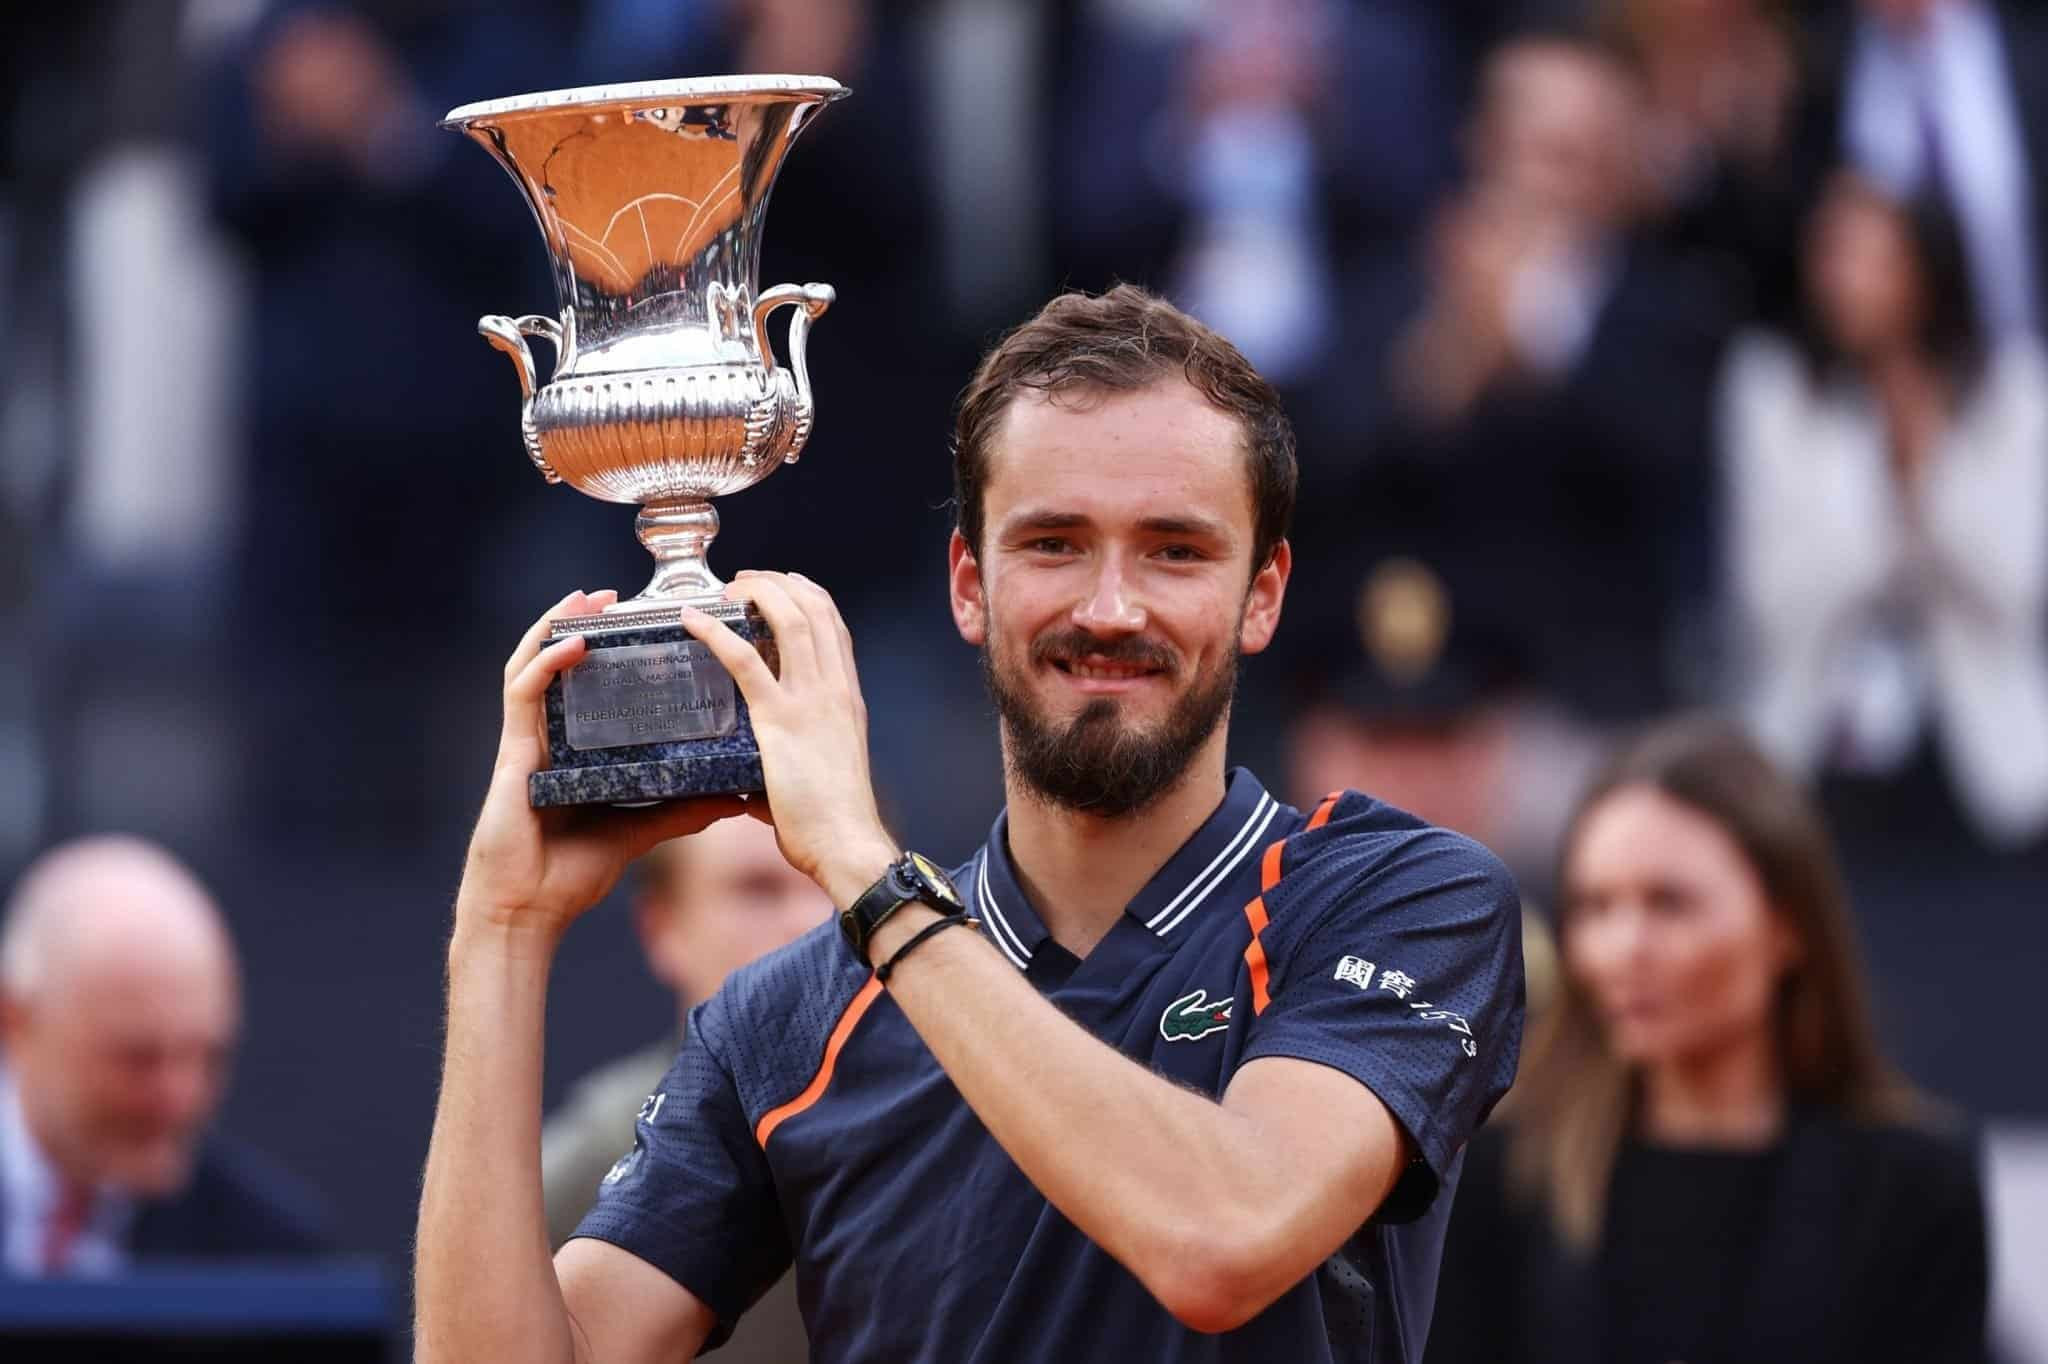 'I never thought I could win clay title,' says Medvedev